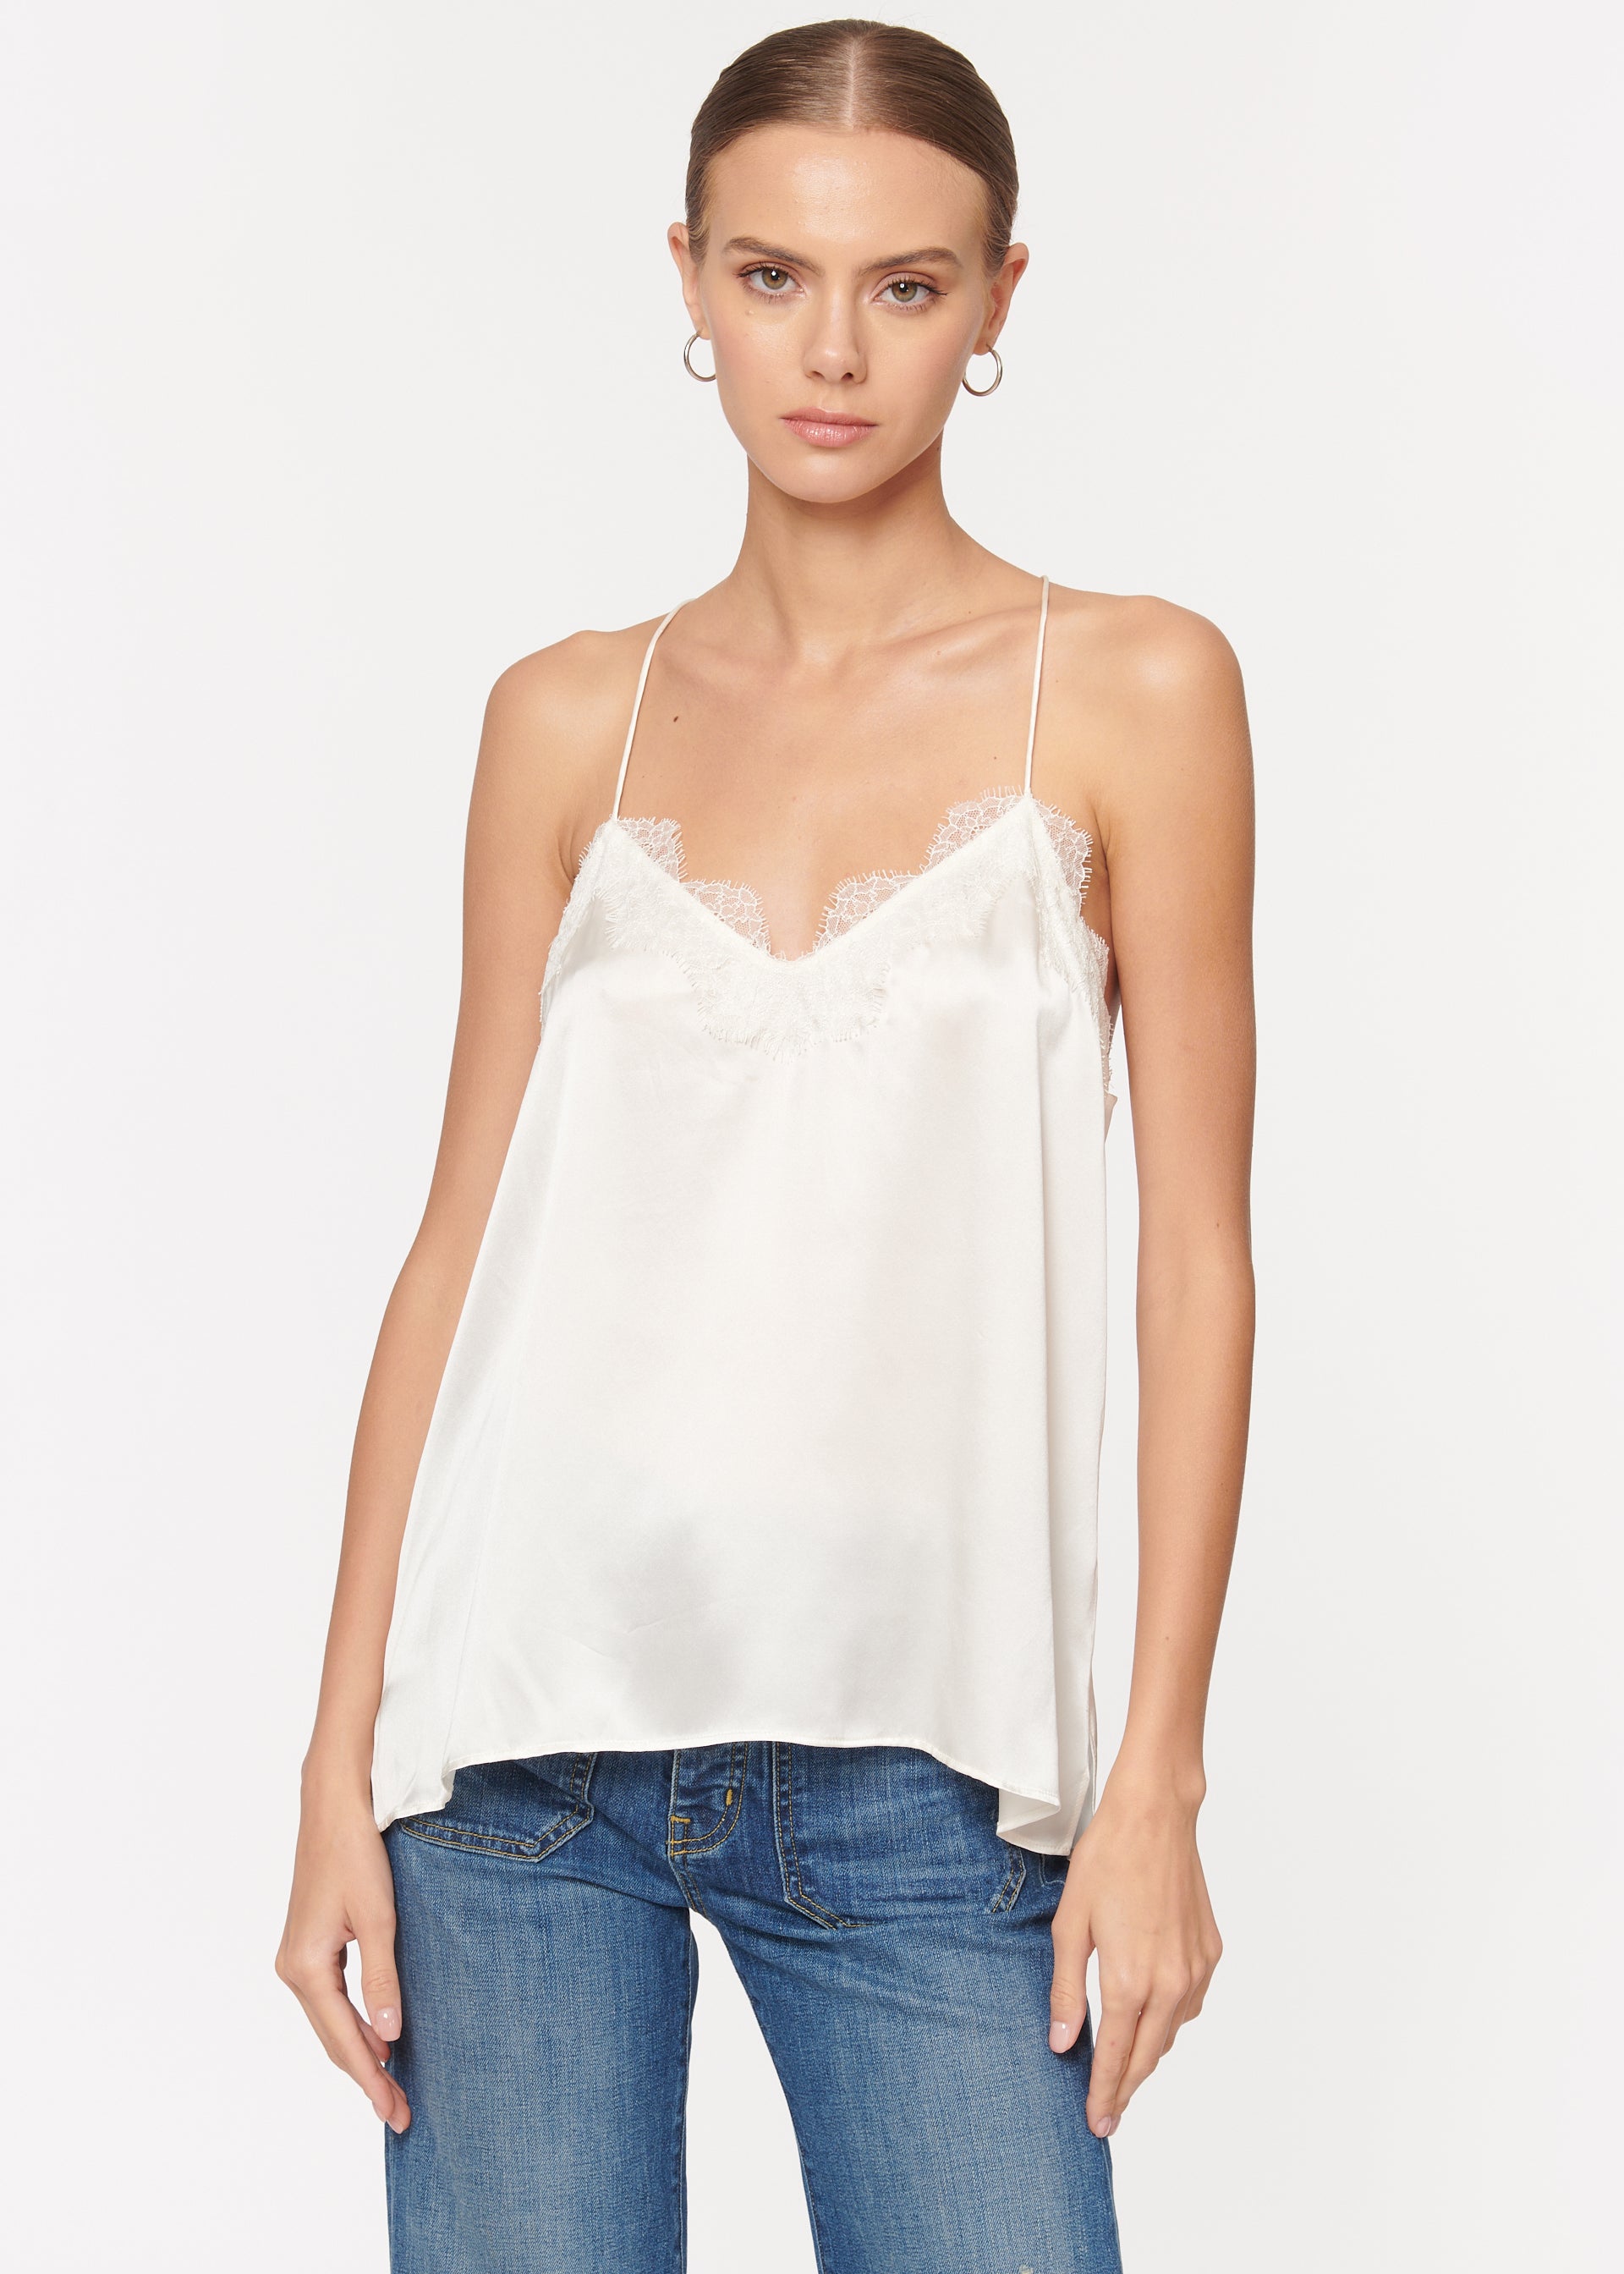 CAMI NYC  Women's Silk Camis, Dresses, Tops & Bottoms.